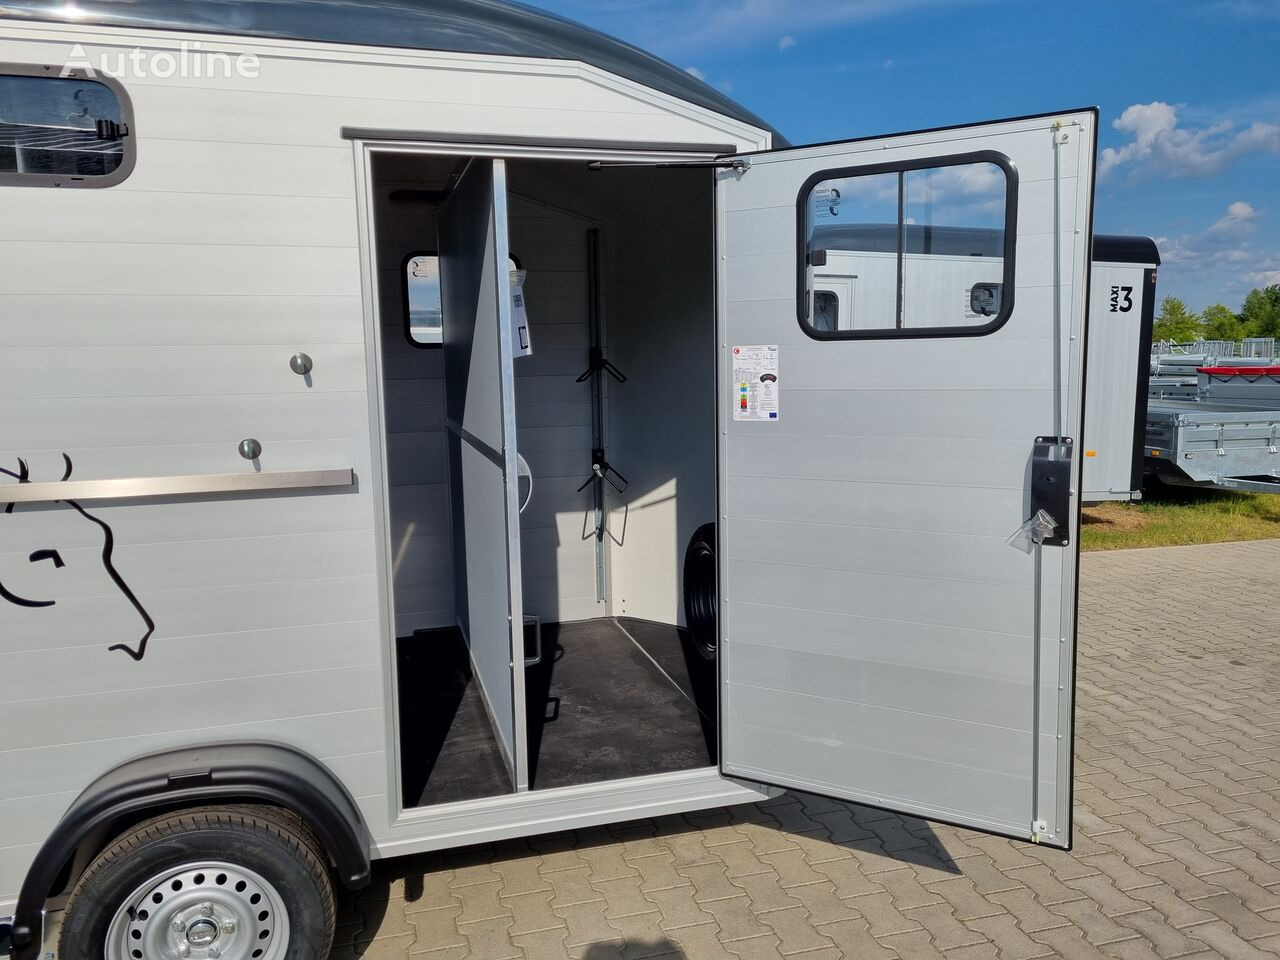 New Horse trailer Cheval Liberté Multimax trailer for 2 horses GVW 2600kg big tack room saddle: picture 27